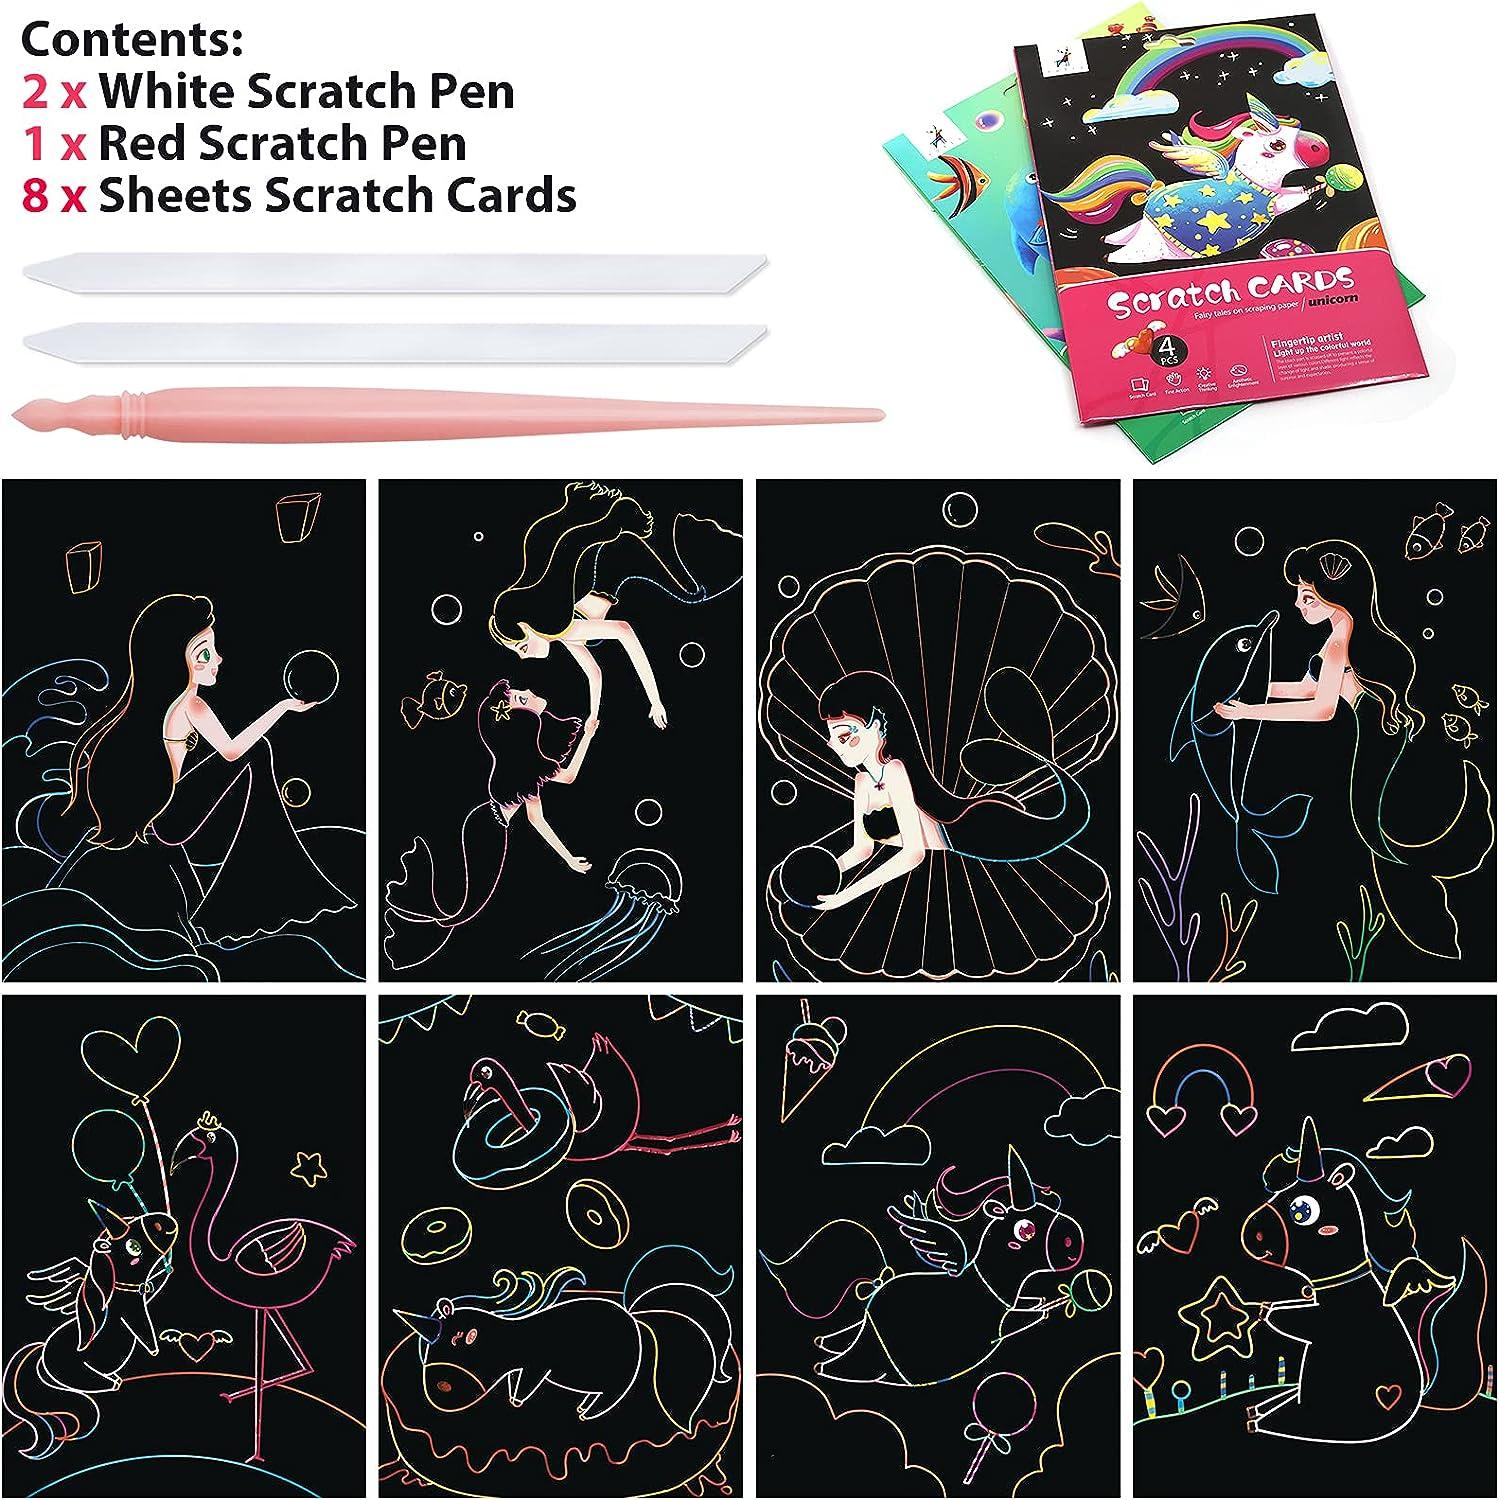 Japanese Scratch Art Kit fairy Tale 4 Designs With 